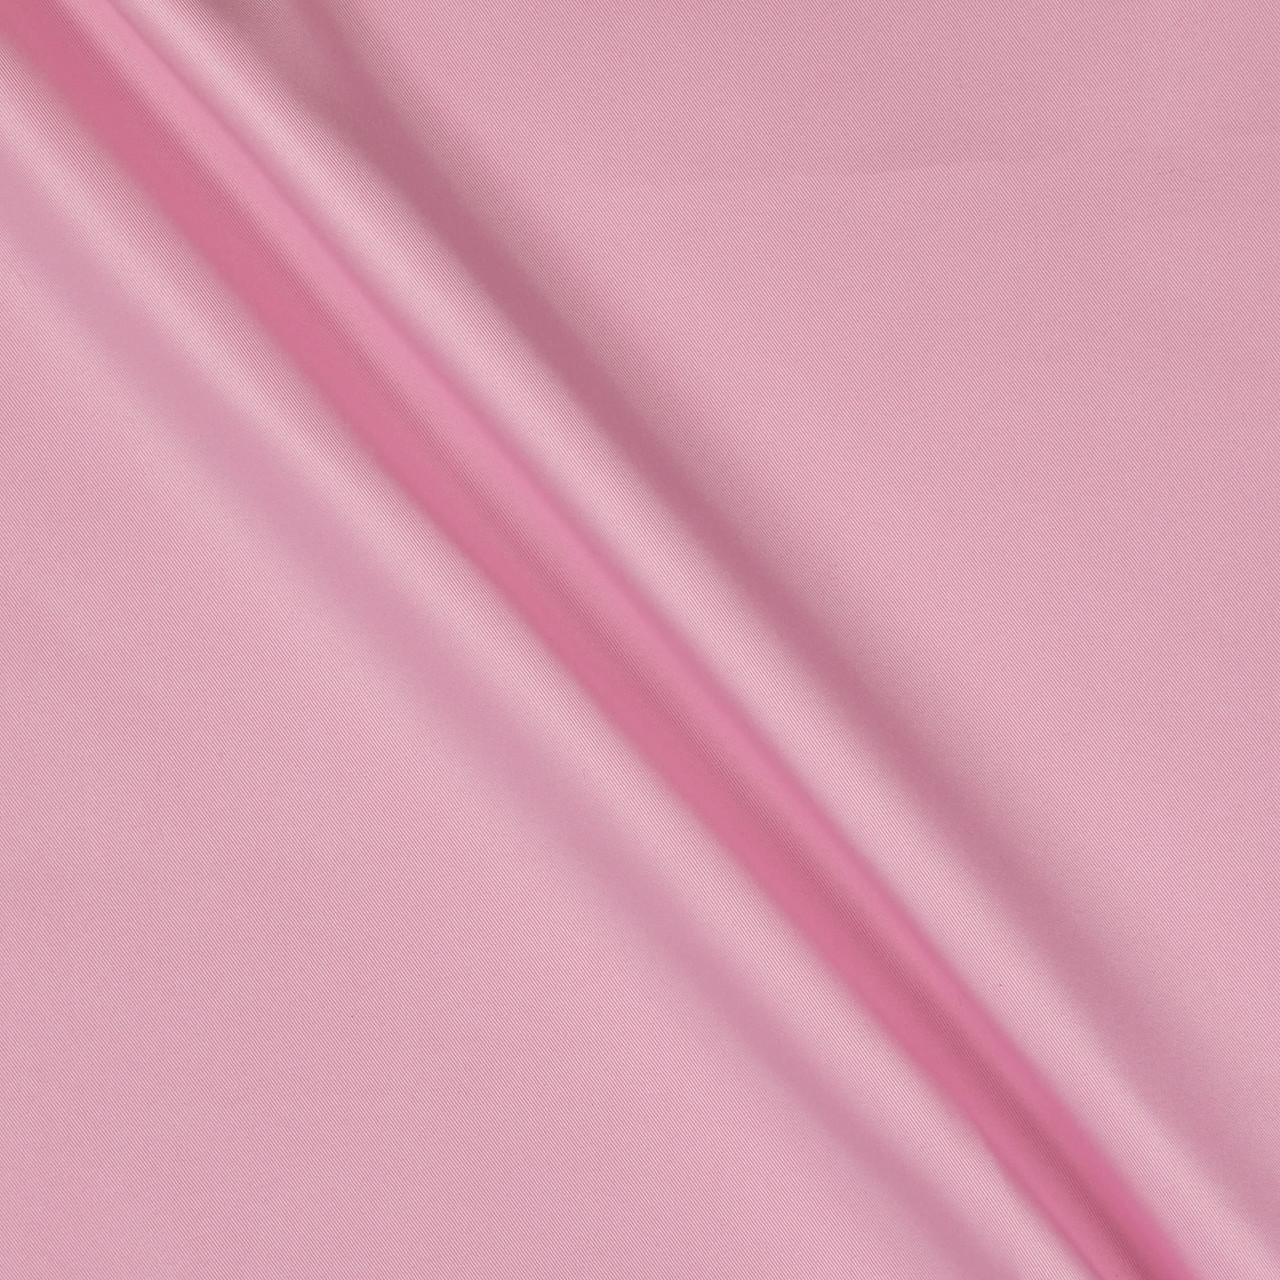 Polyester Twill Solid Pink, Medium Weight Twill Fabric, Home Decor Fabric